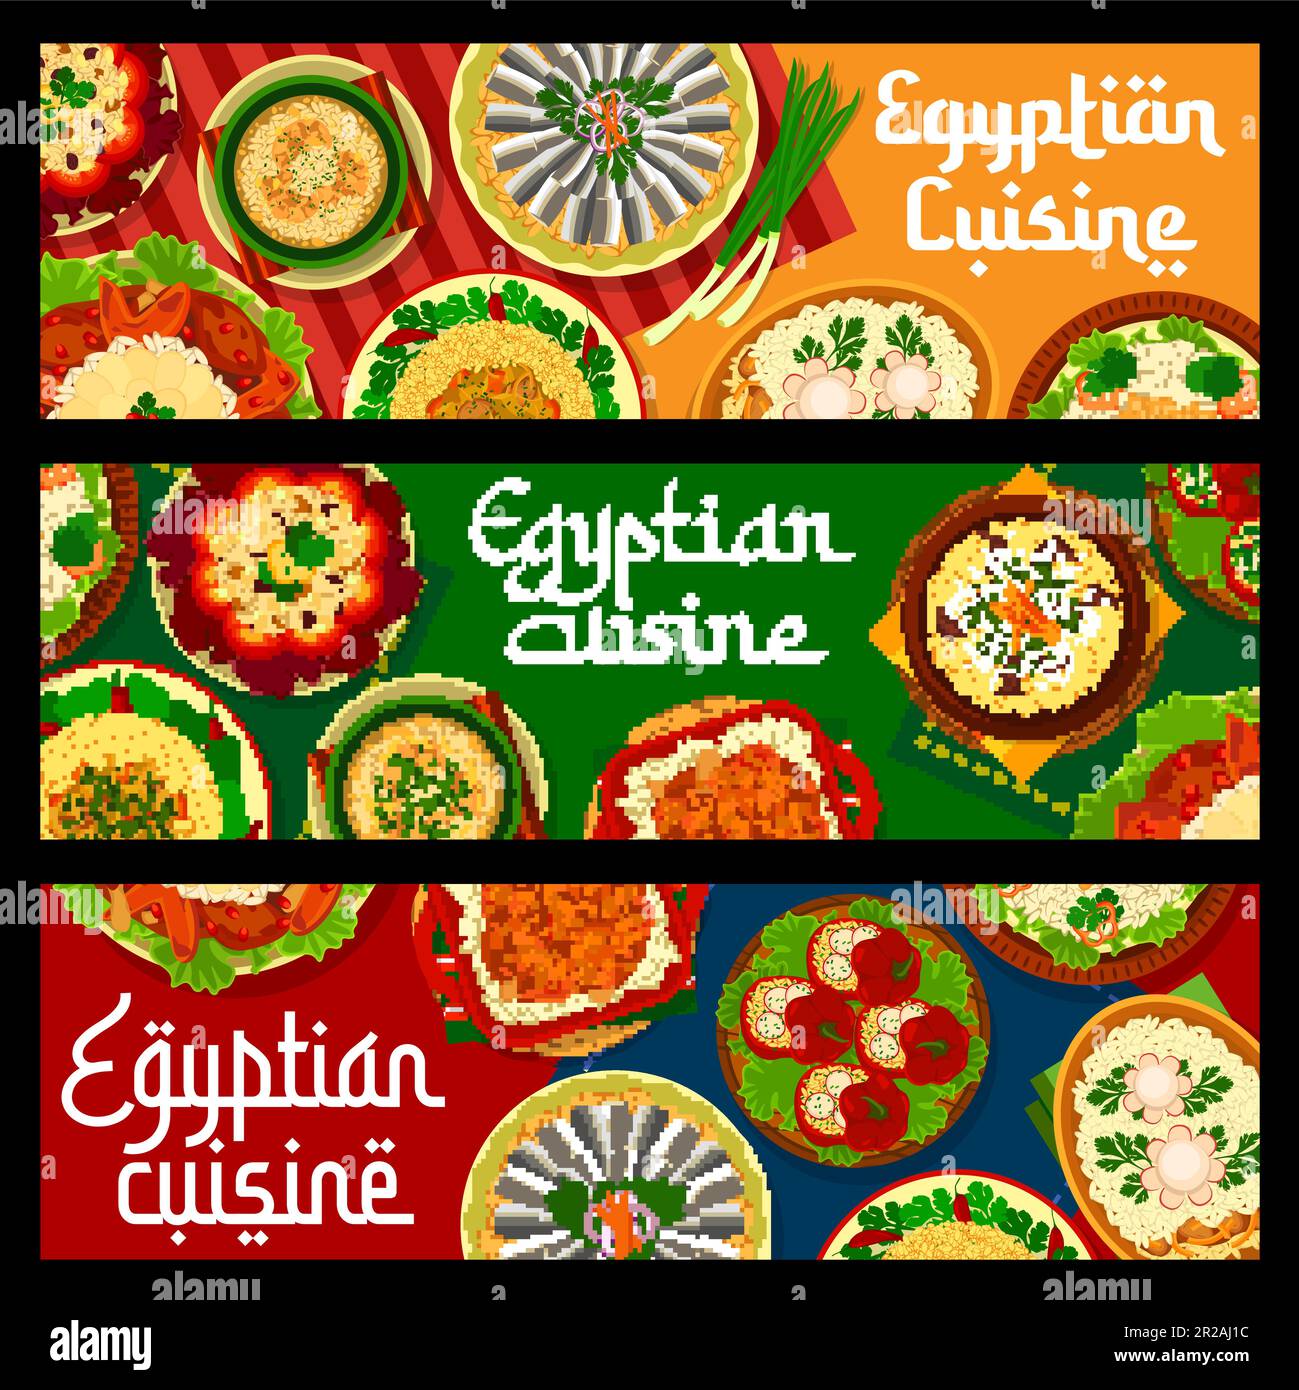 Egyptian cuisine restaurant food banners, dishes and meals of Egypt, vector. Egyptian food couscous and pilaf rice with lamb, shurba al-lmma soup with meatballs and megaddara with lentils or chicken Stock Vector